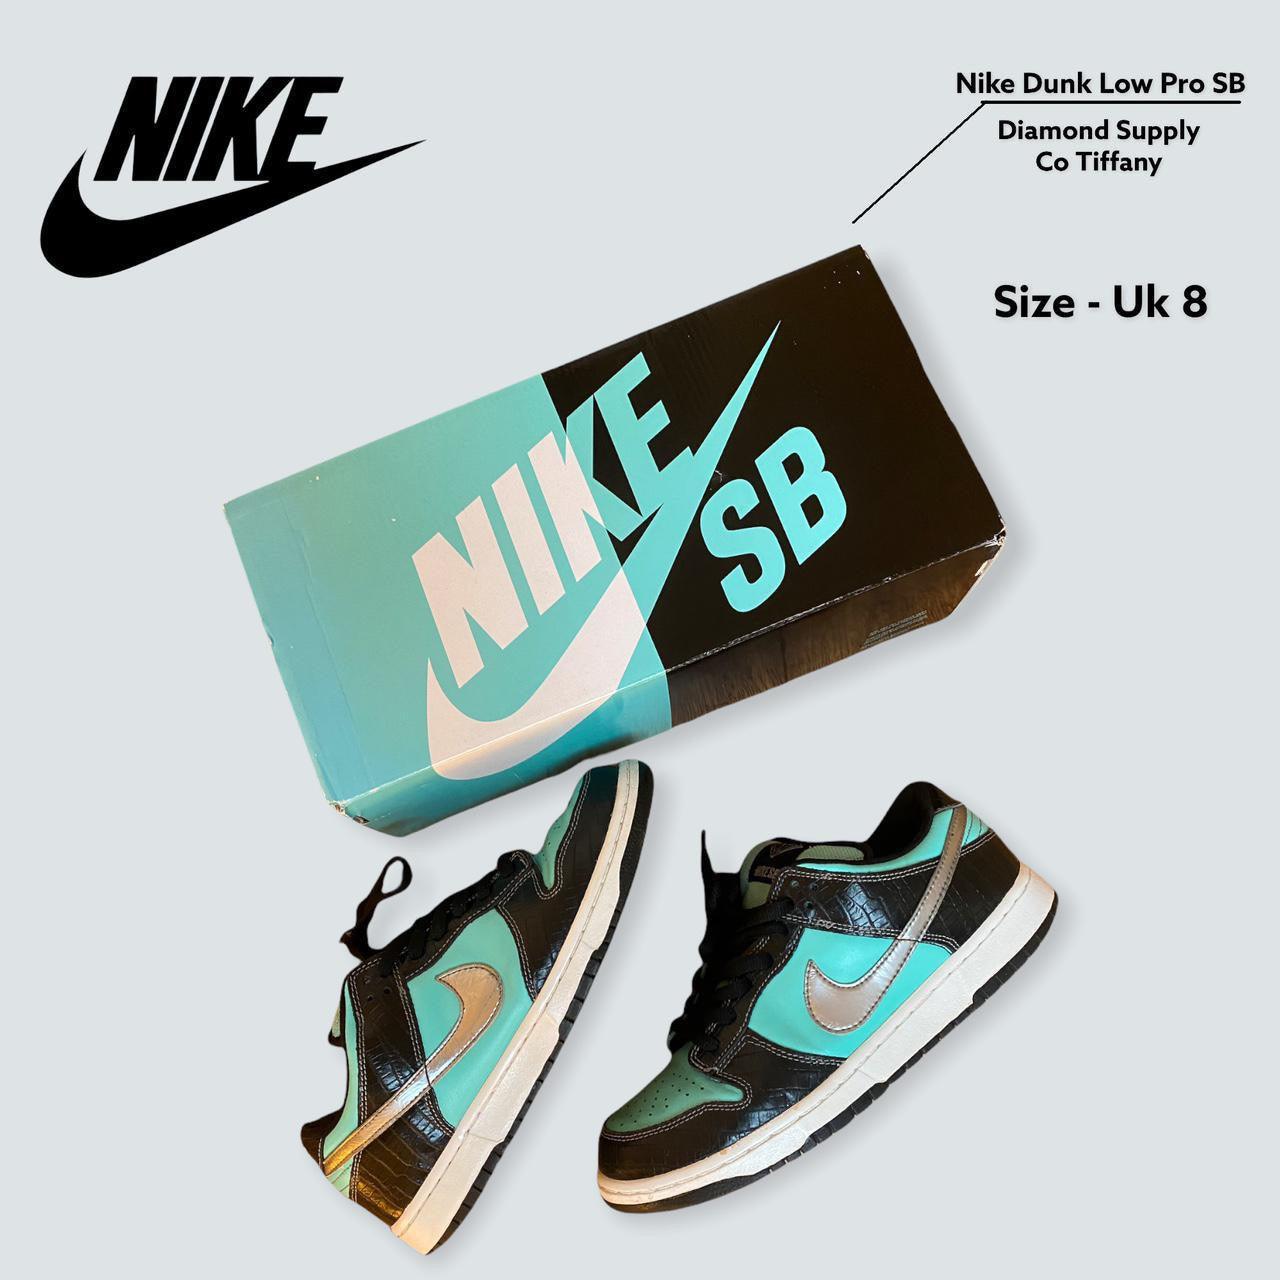 Nike Dunk Low SB Dimond Supply Co Tiffany uk 8 - Known Source